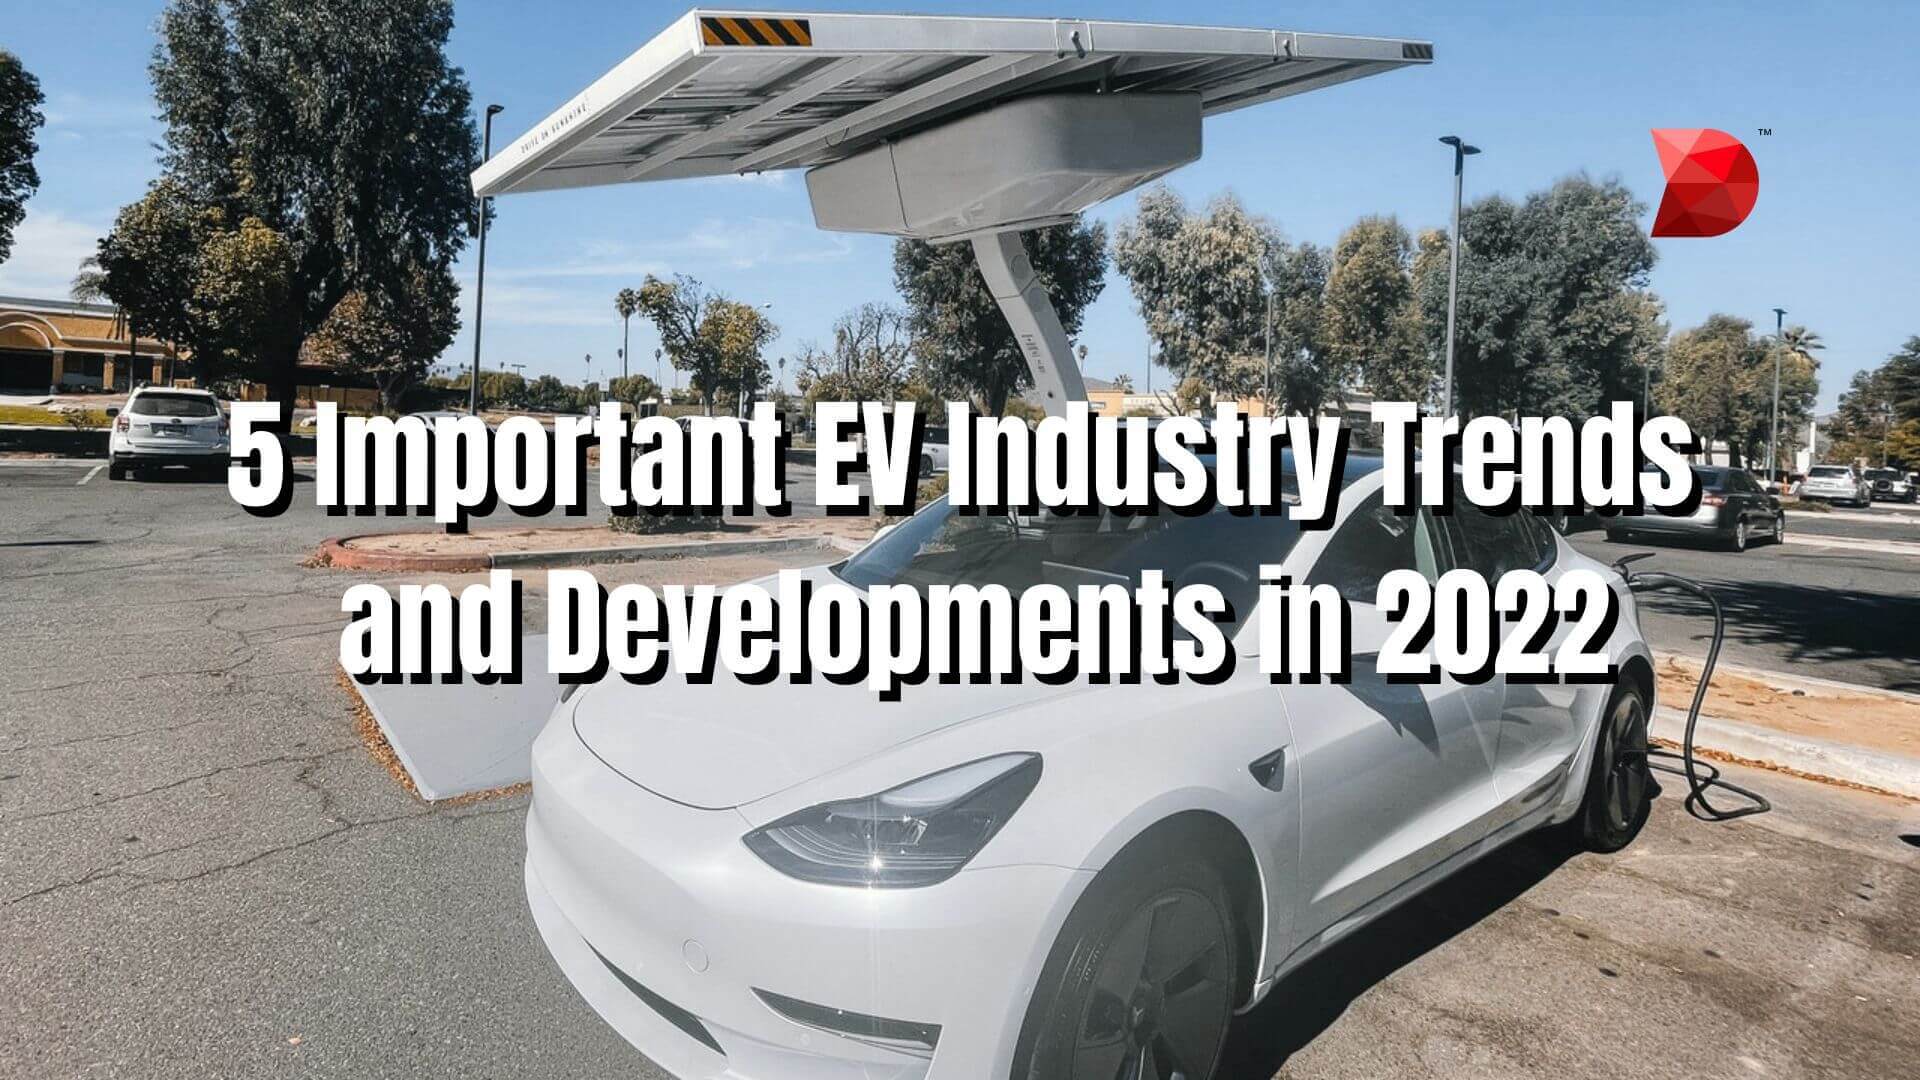 5 Important EV Industry Trends and Developments in 2022